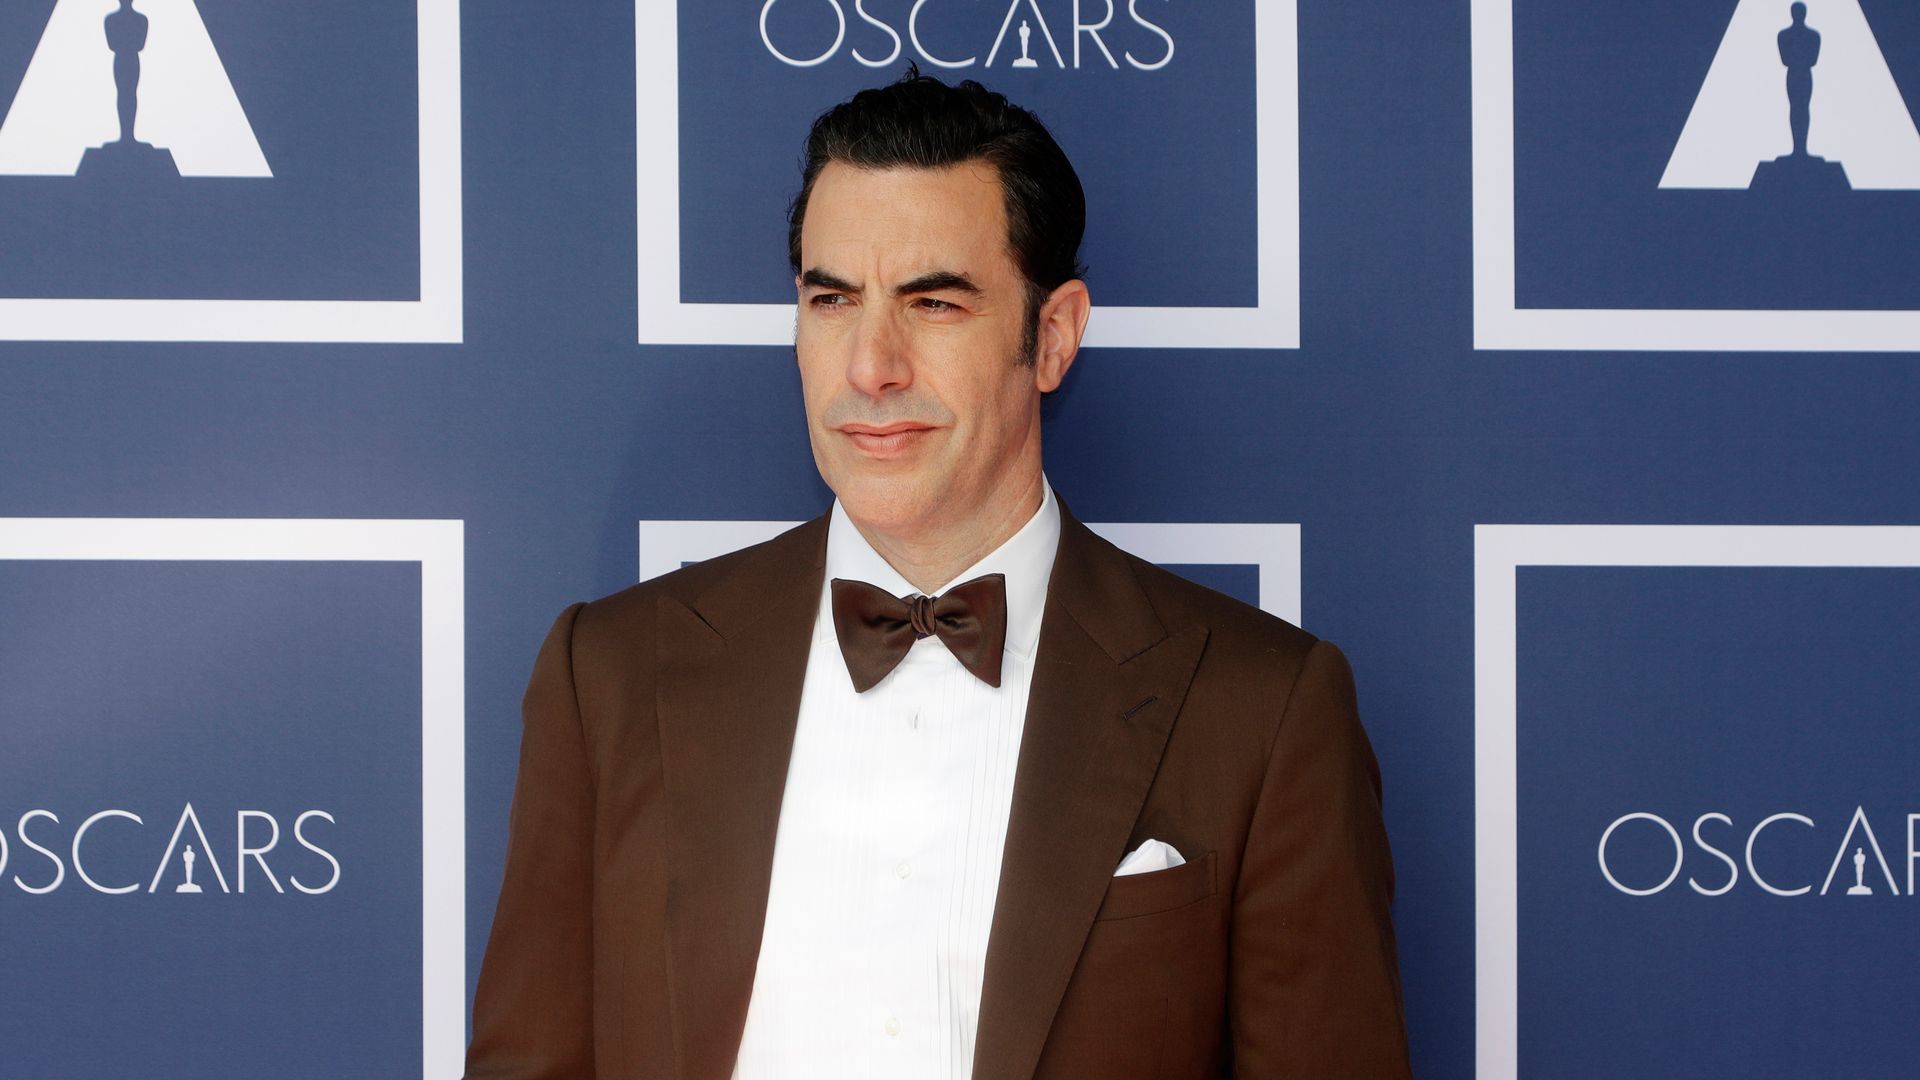 Sacha Baron Cohen attends a screening of the Oscars on April 26, 2021 in Sydney, Australia